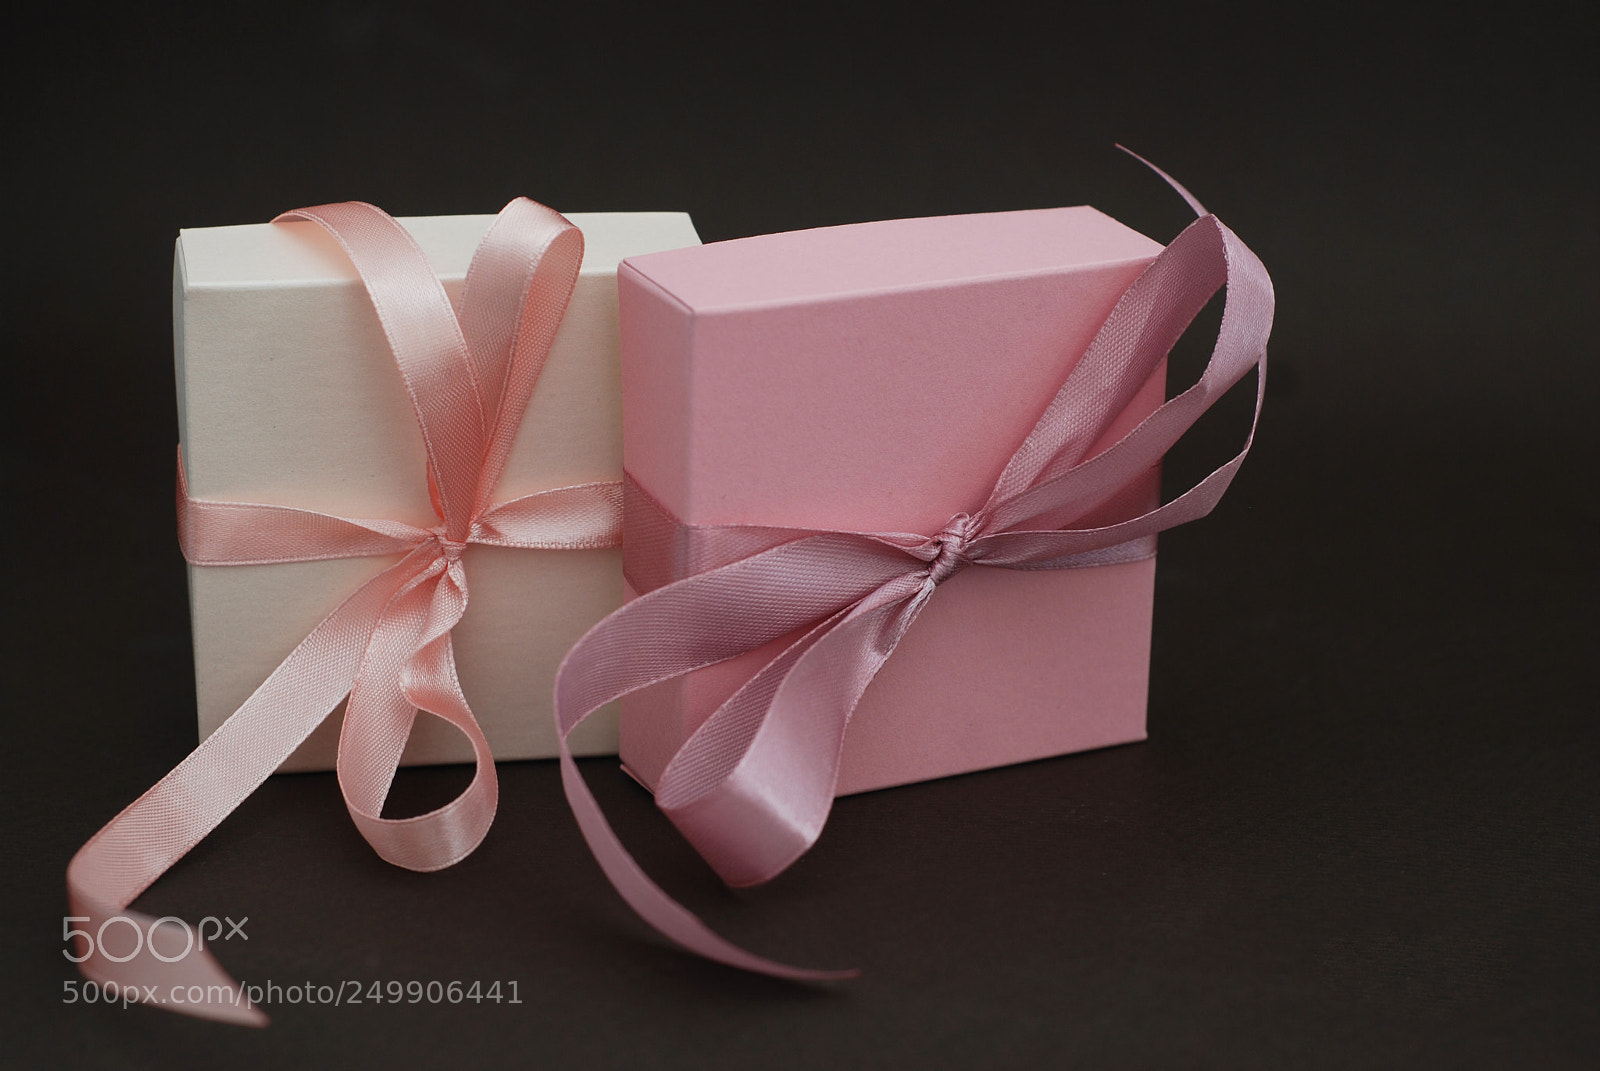 Nikon D80 sample photo. Two gift boxes with photography